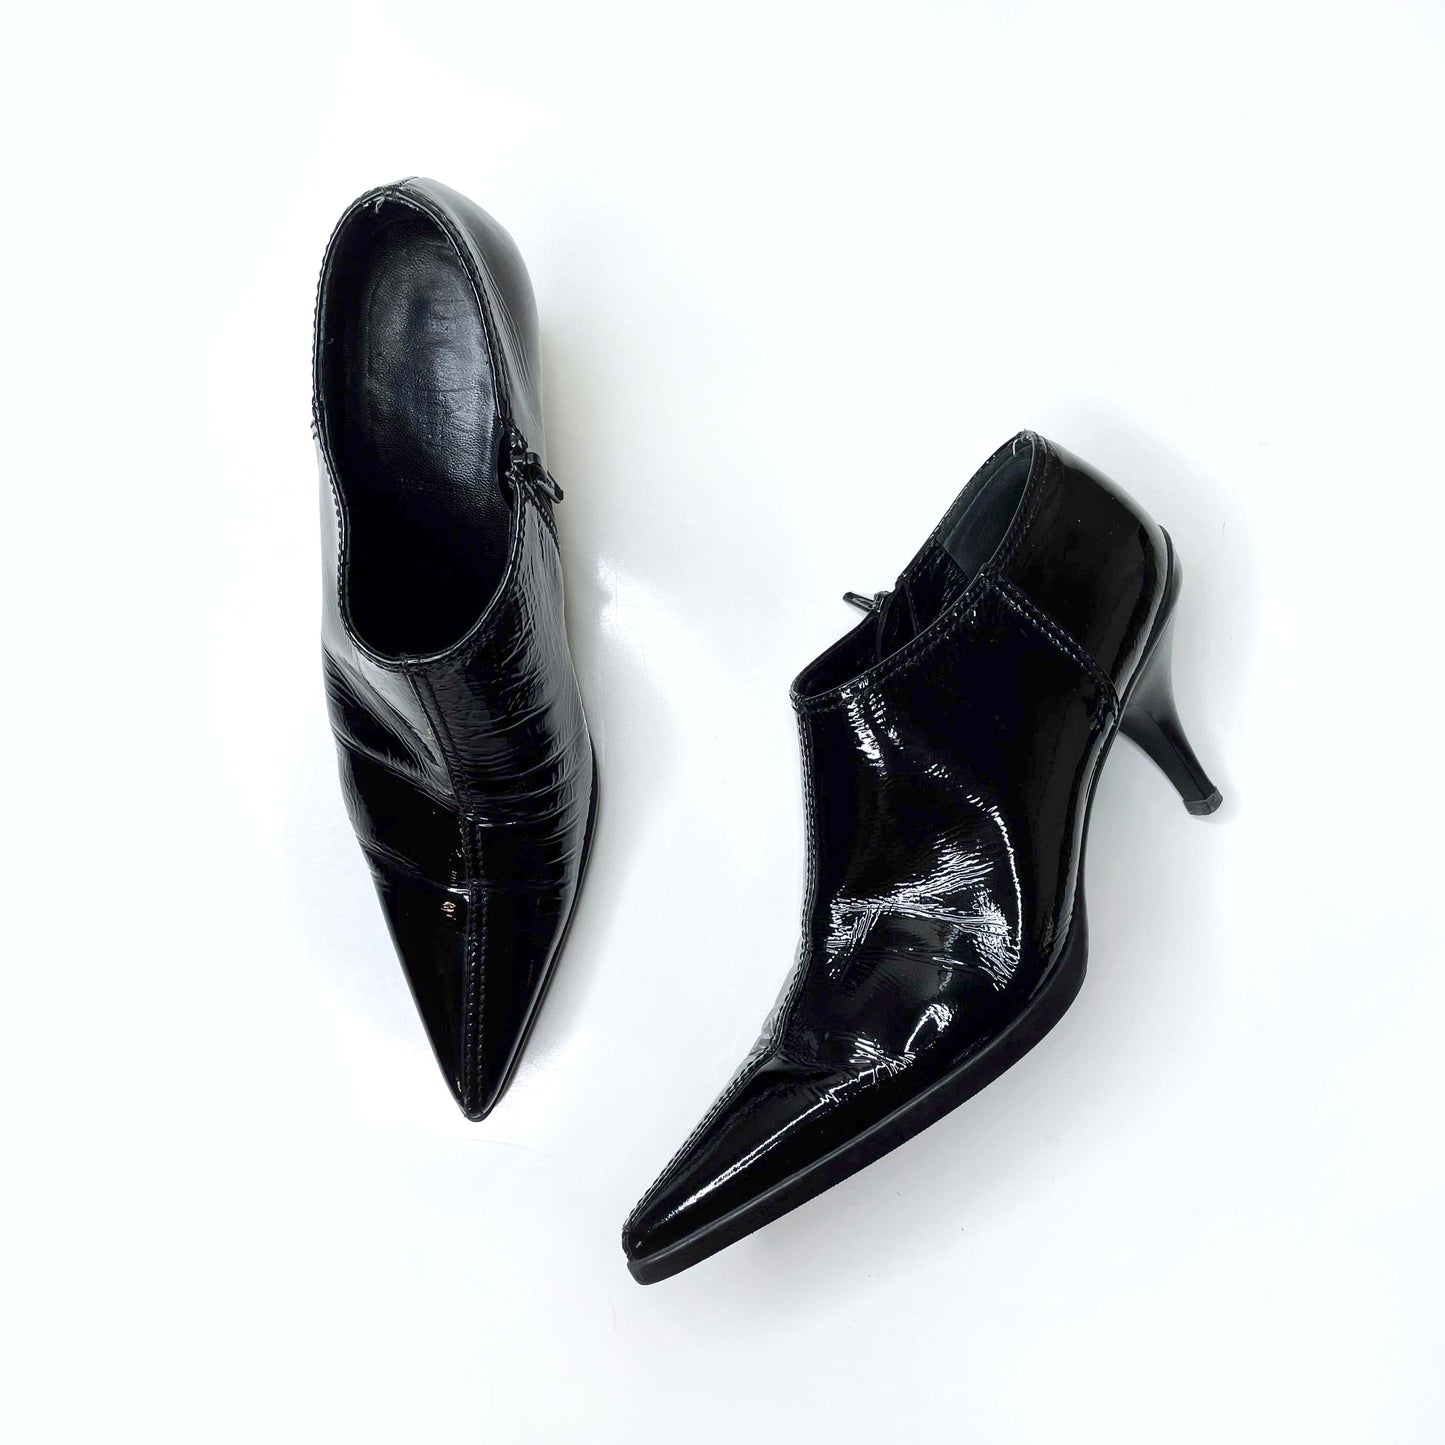 miu miu black pointed toe patent leather ankle boots - size 39